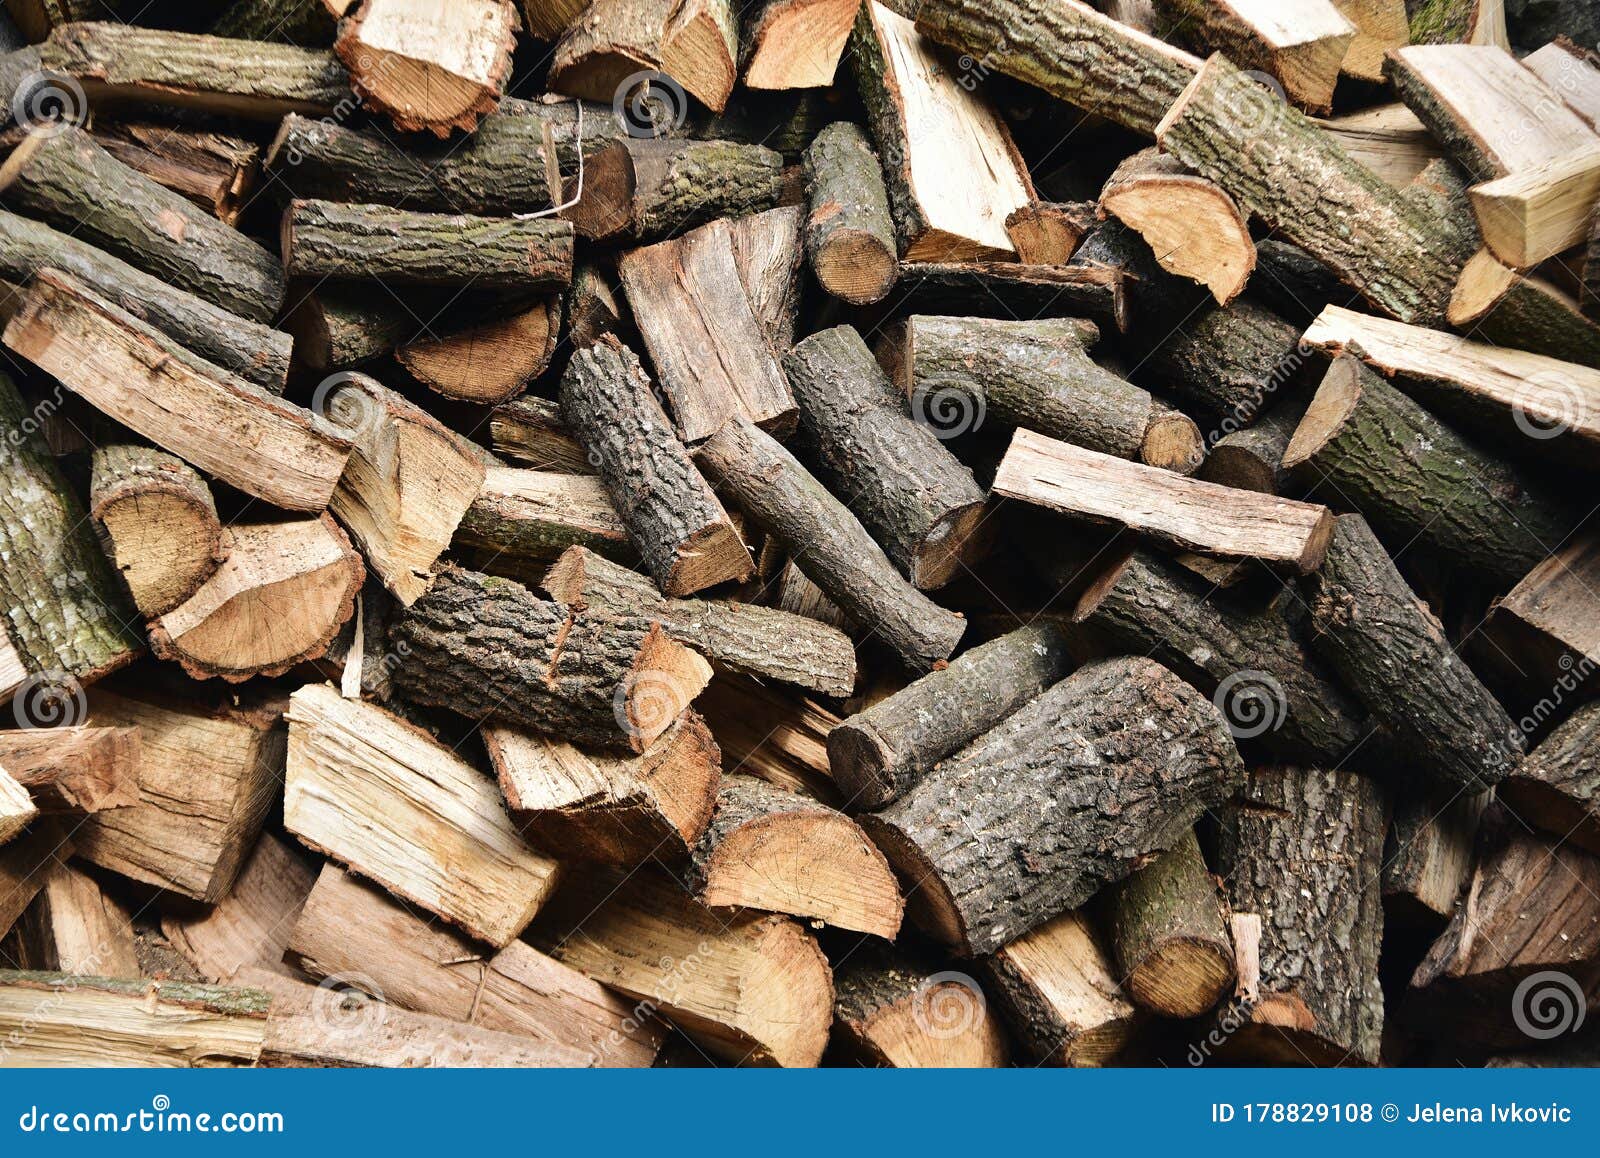 9 503 Oak Firewood Photos Free Royalty Free Stock Photos From Dreamstime